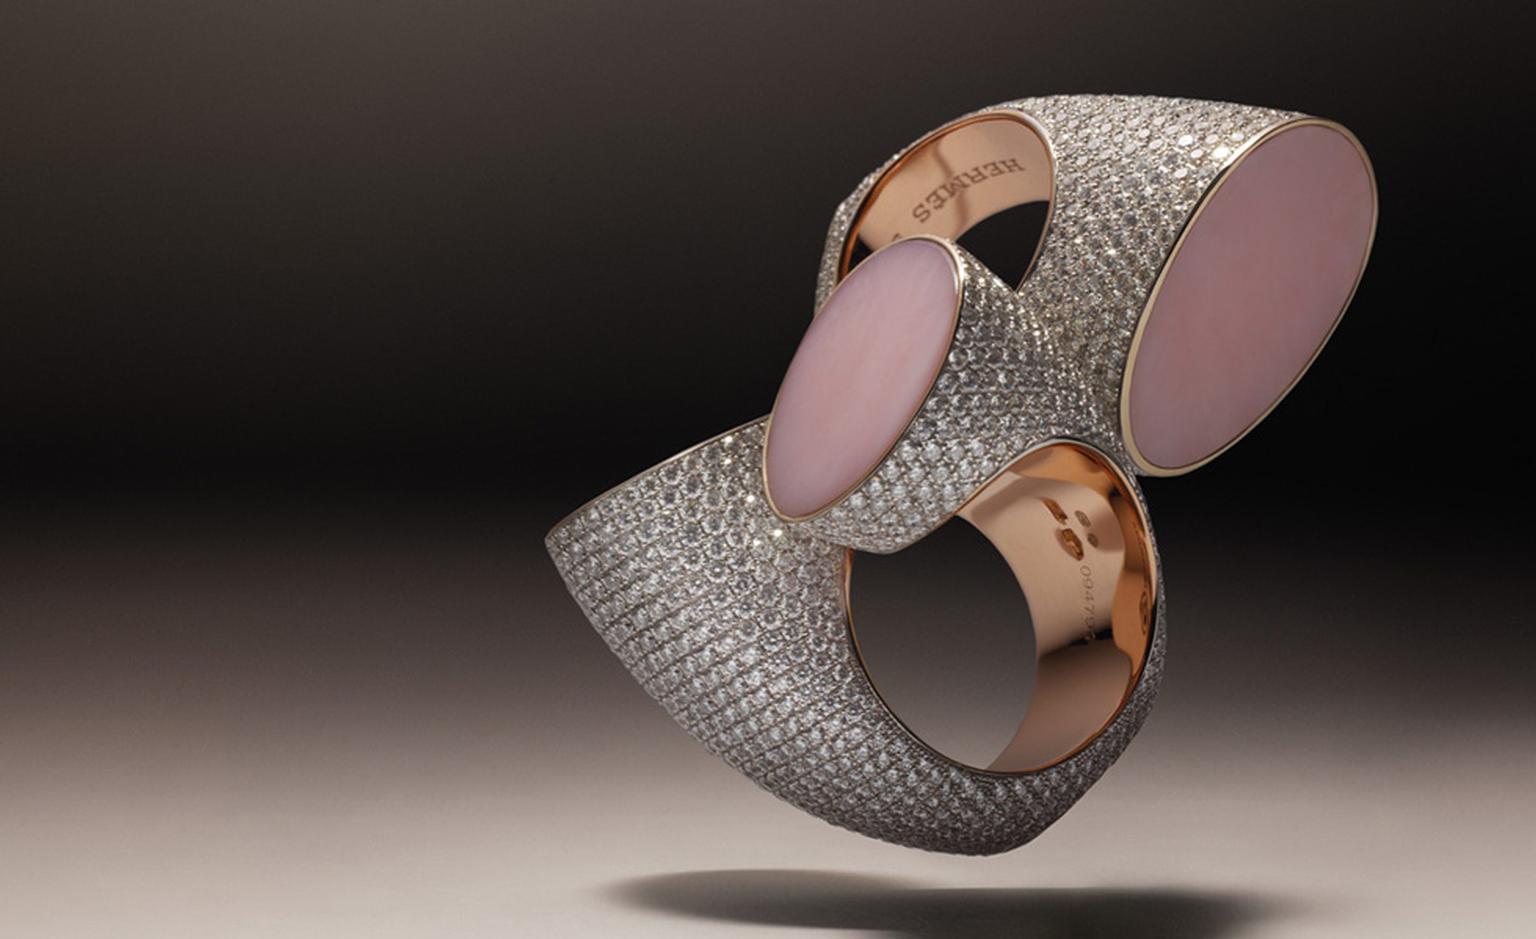 Hermès Centaure double and single rings in rose gold with diamonds and pink opal.